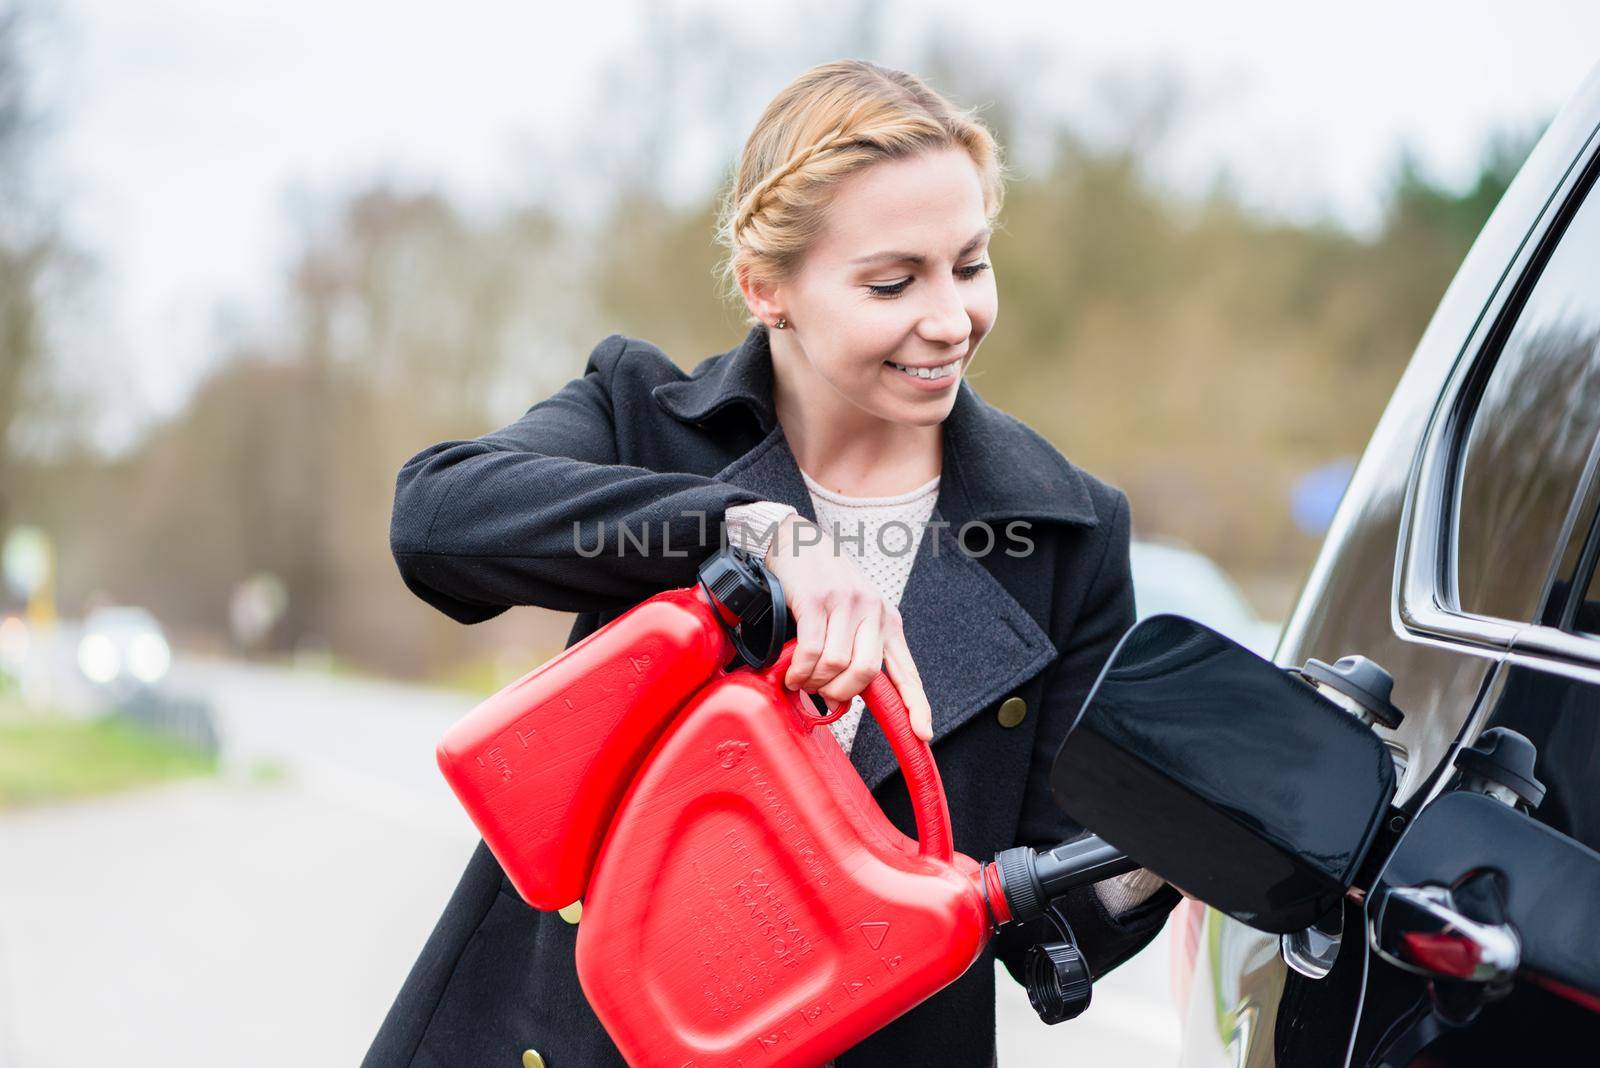 Woman filling car up with gas from the spare canister by Kzenon